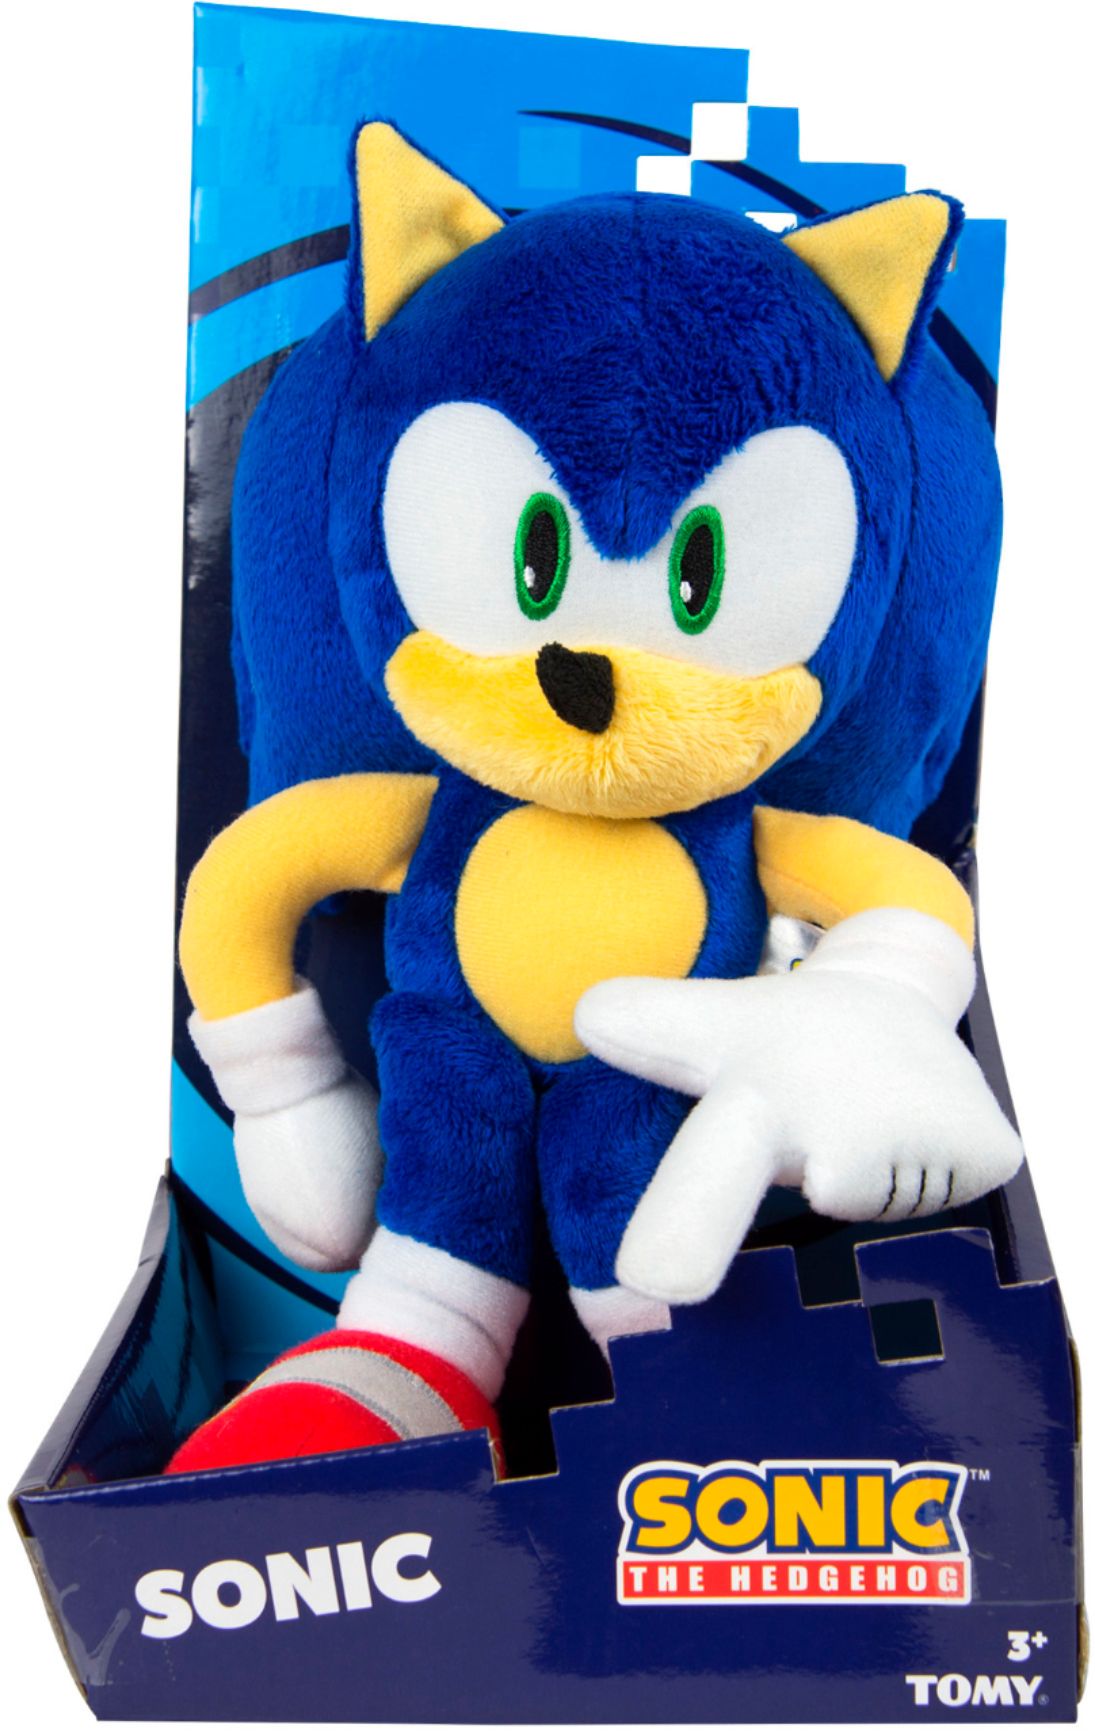 im back Sonic plushies and figures from brazil : r/sonicplushes